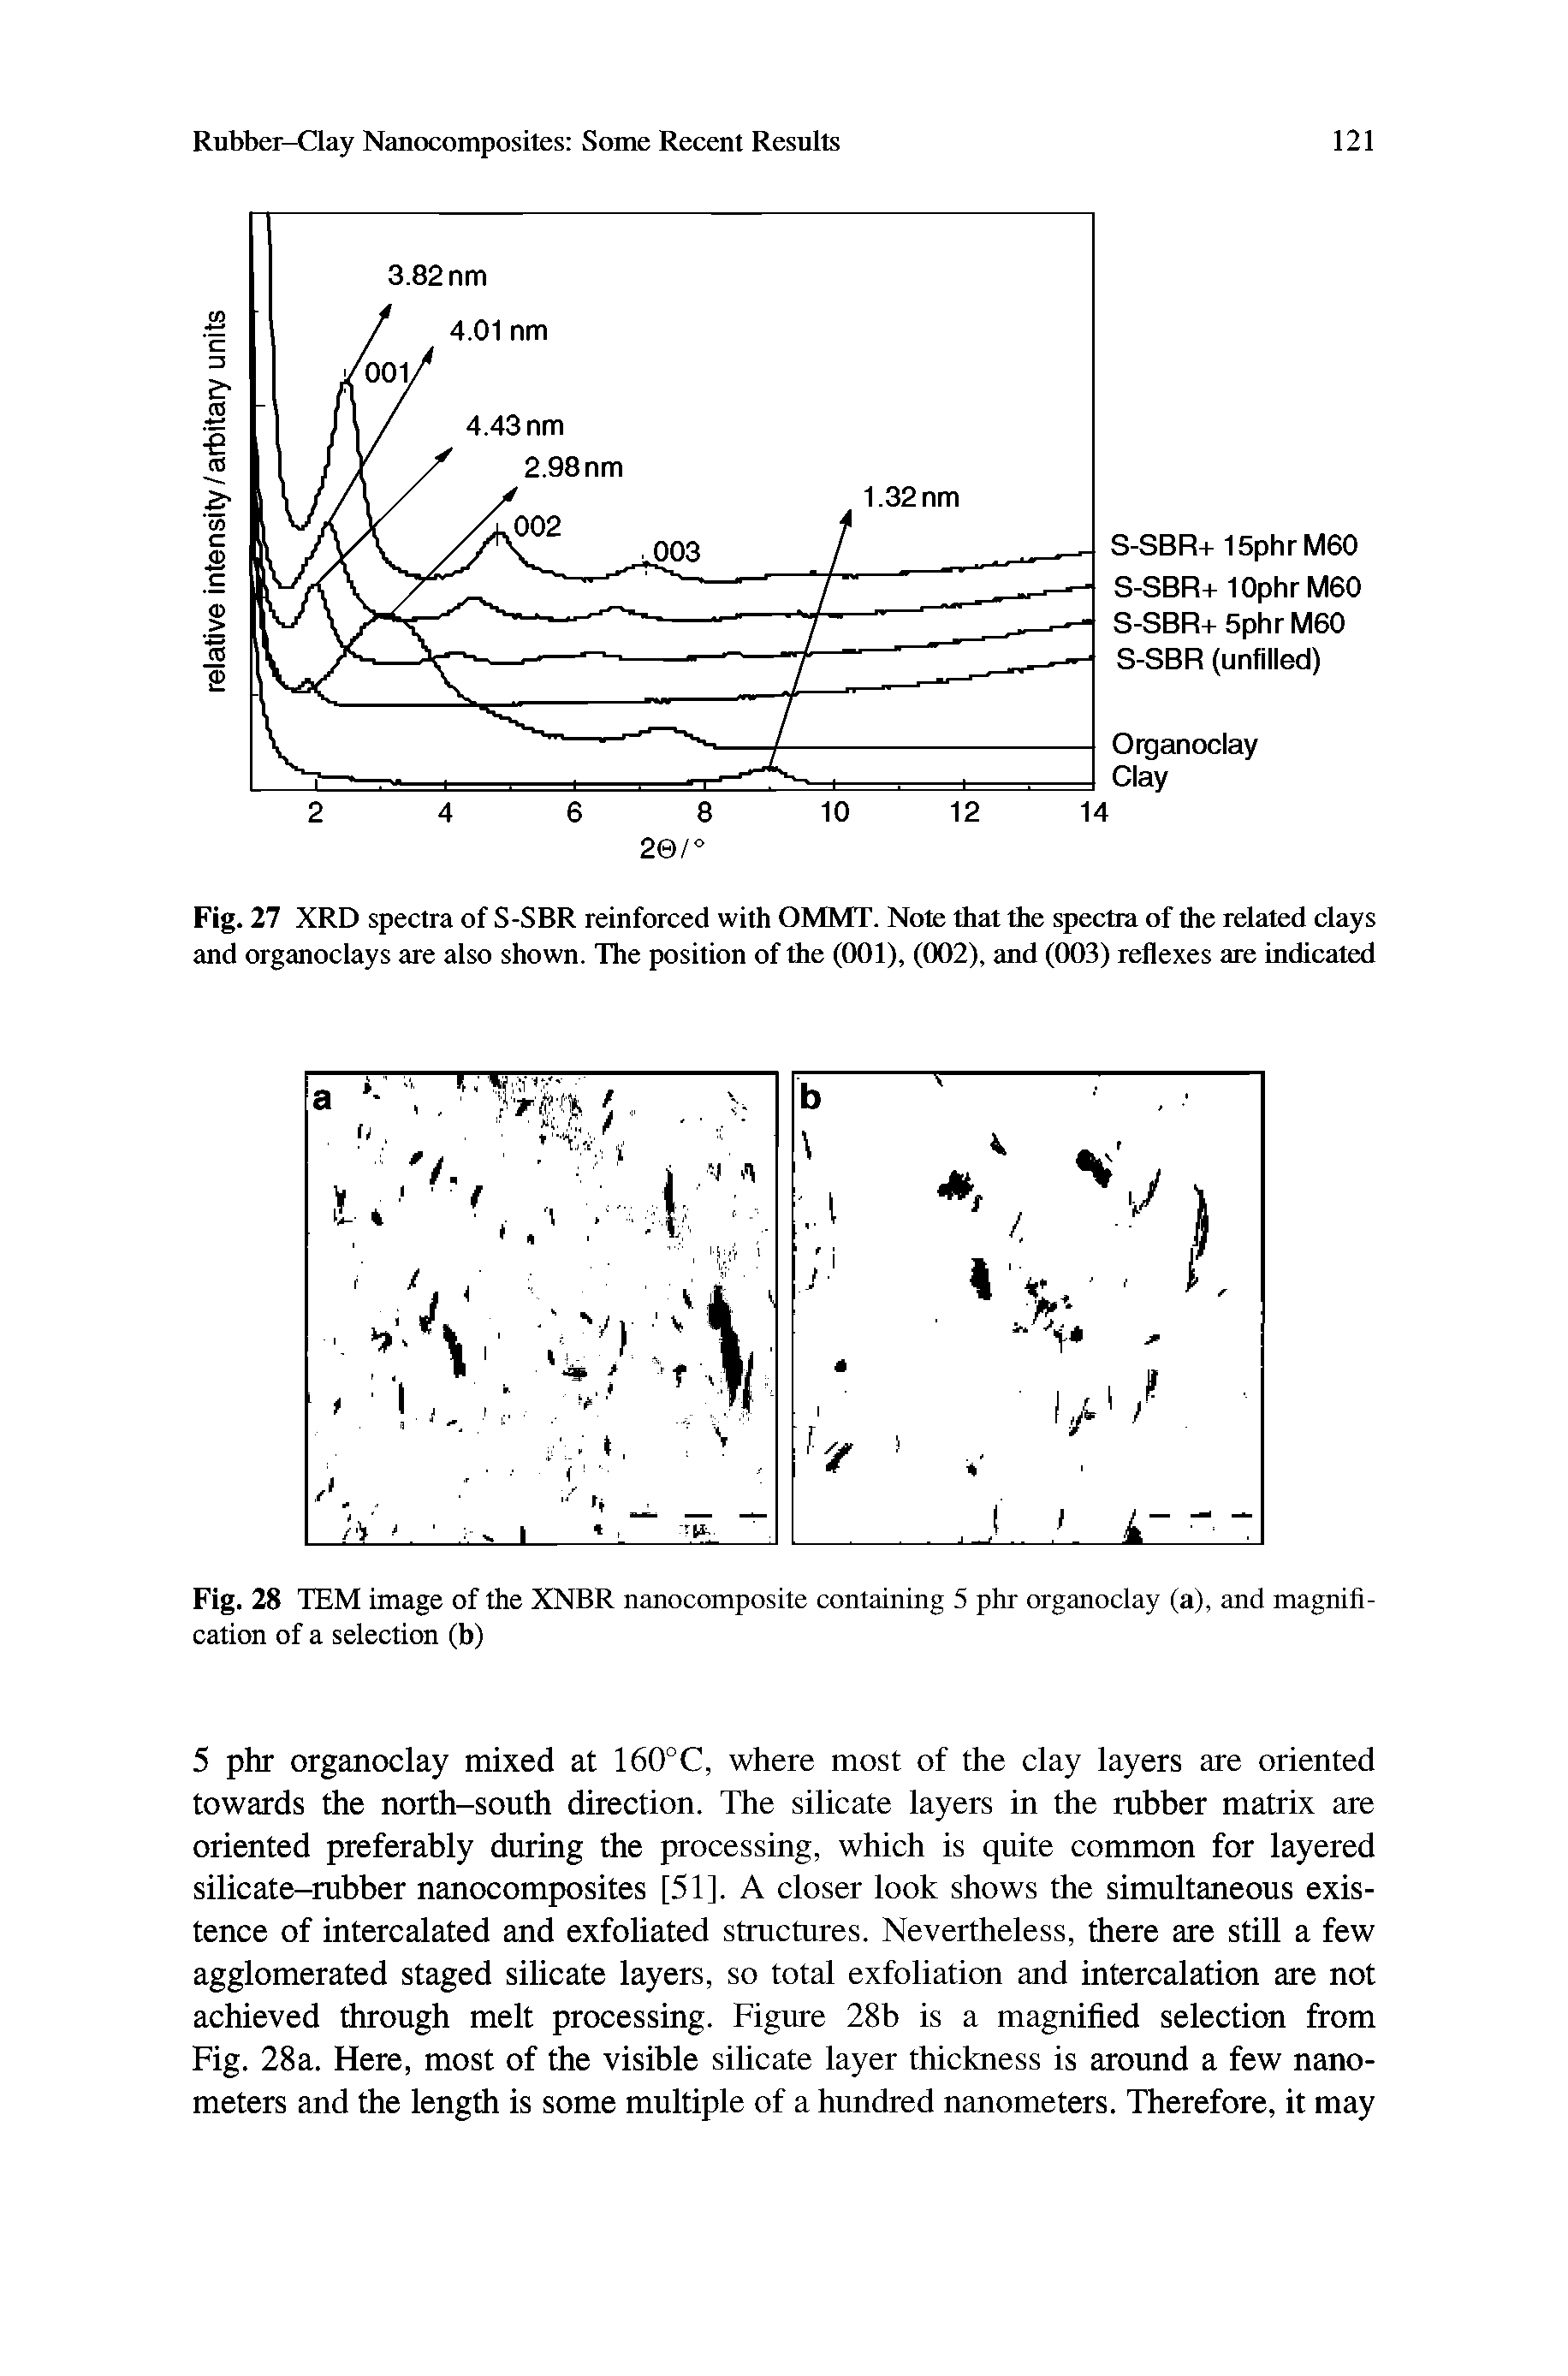 Fig. 27 XRD spectra of S-SBR reinforced with OMMT. Note that the spectra of the related clays and organoclays are also shown. The position of the (001), (002), and (003) reflexes are indicated...